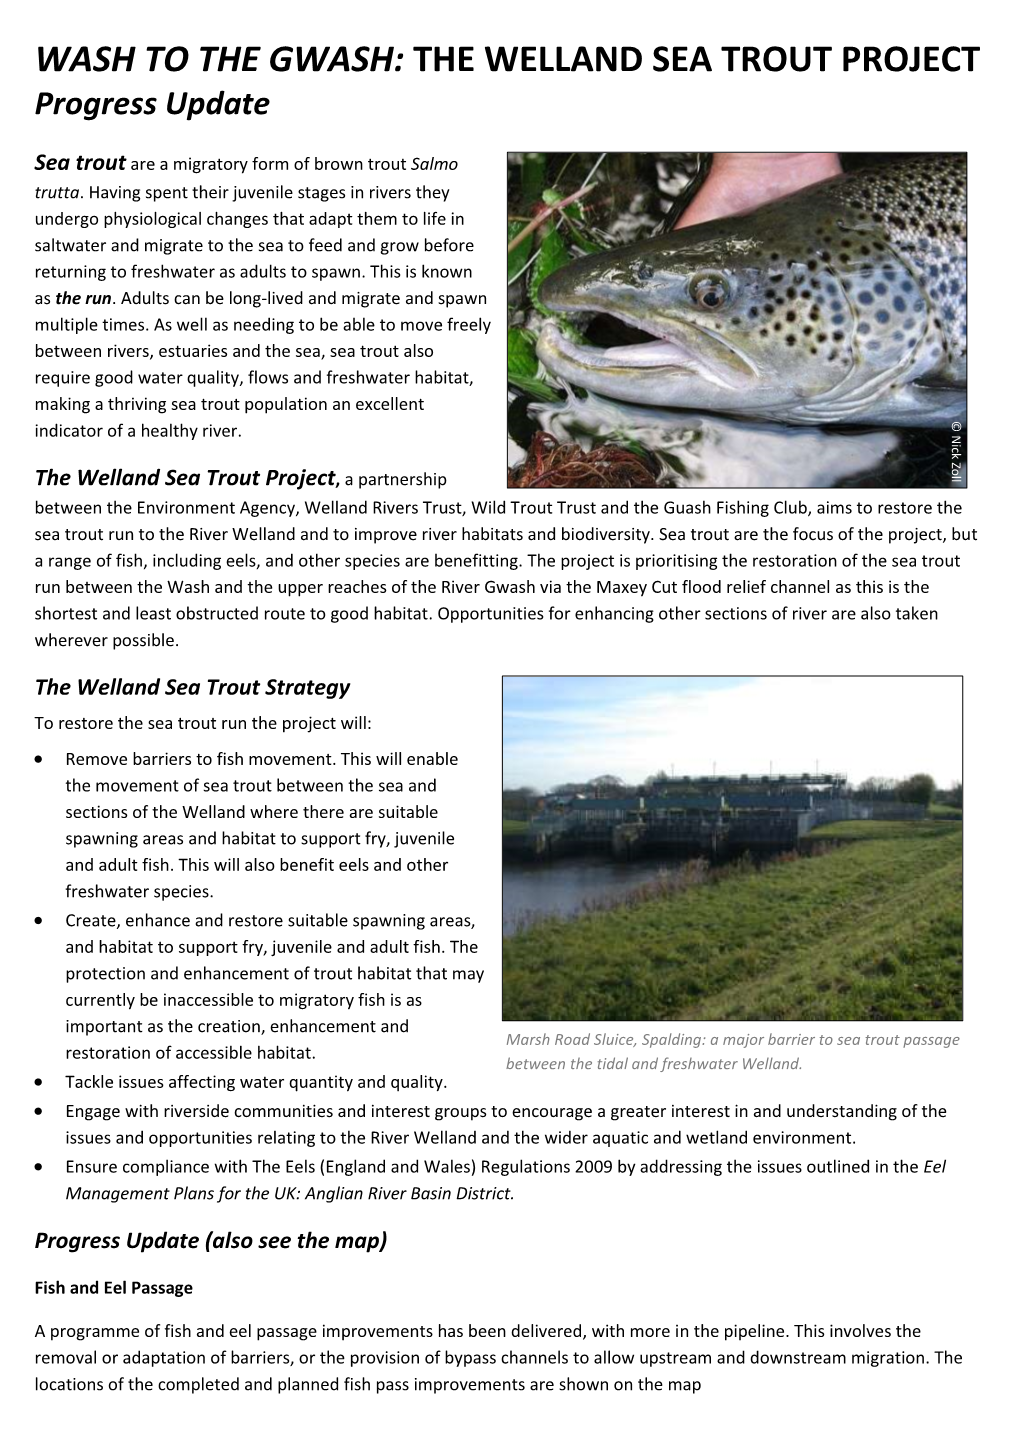 WASH to the GWASH: the WELLAND SEA TROUT PROJECT Progress Update